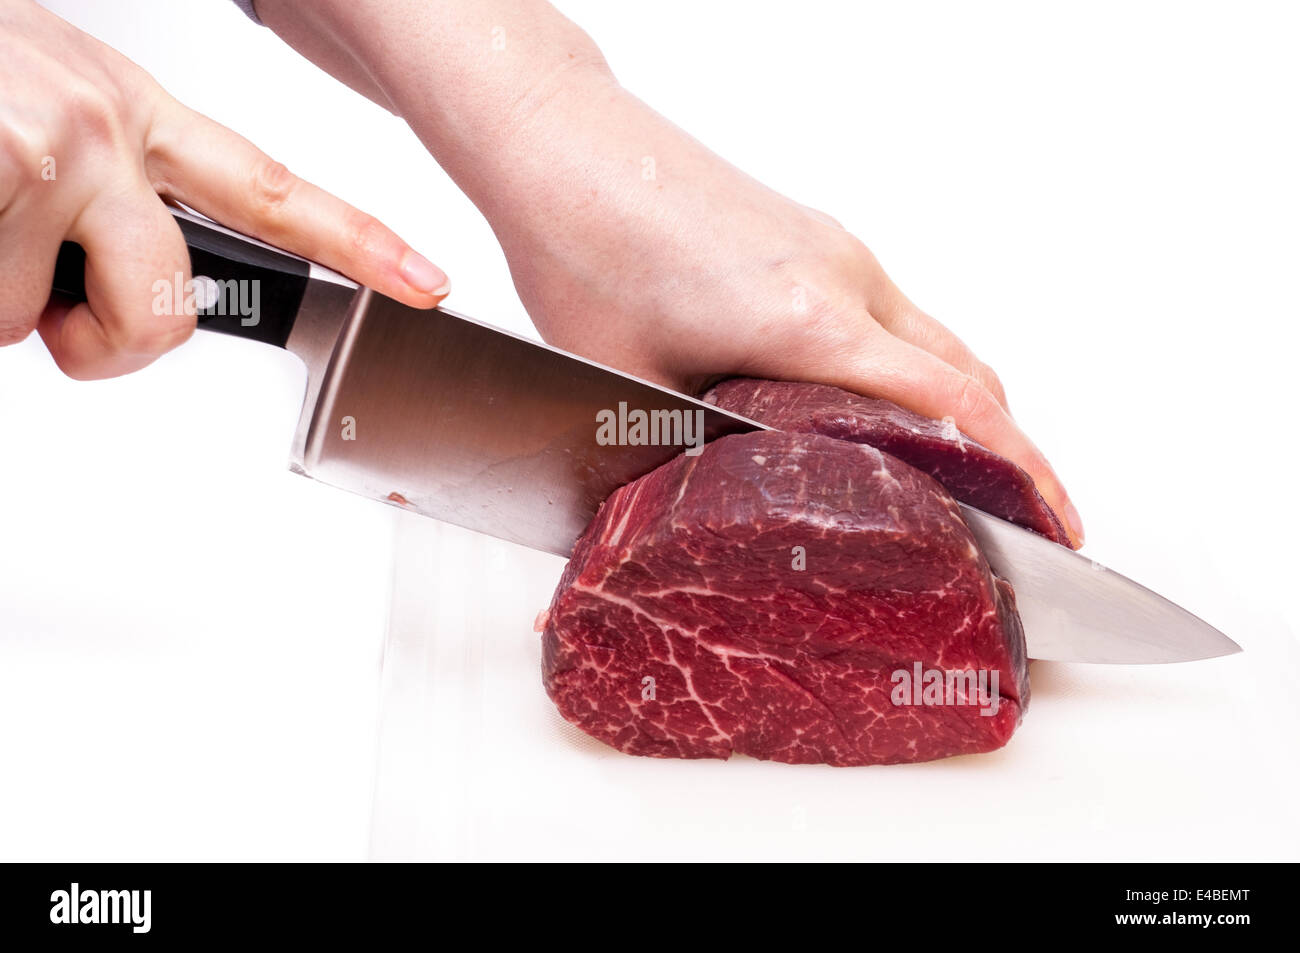 Two hands cutting a fillet of beef Stock Photo